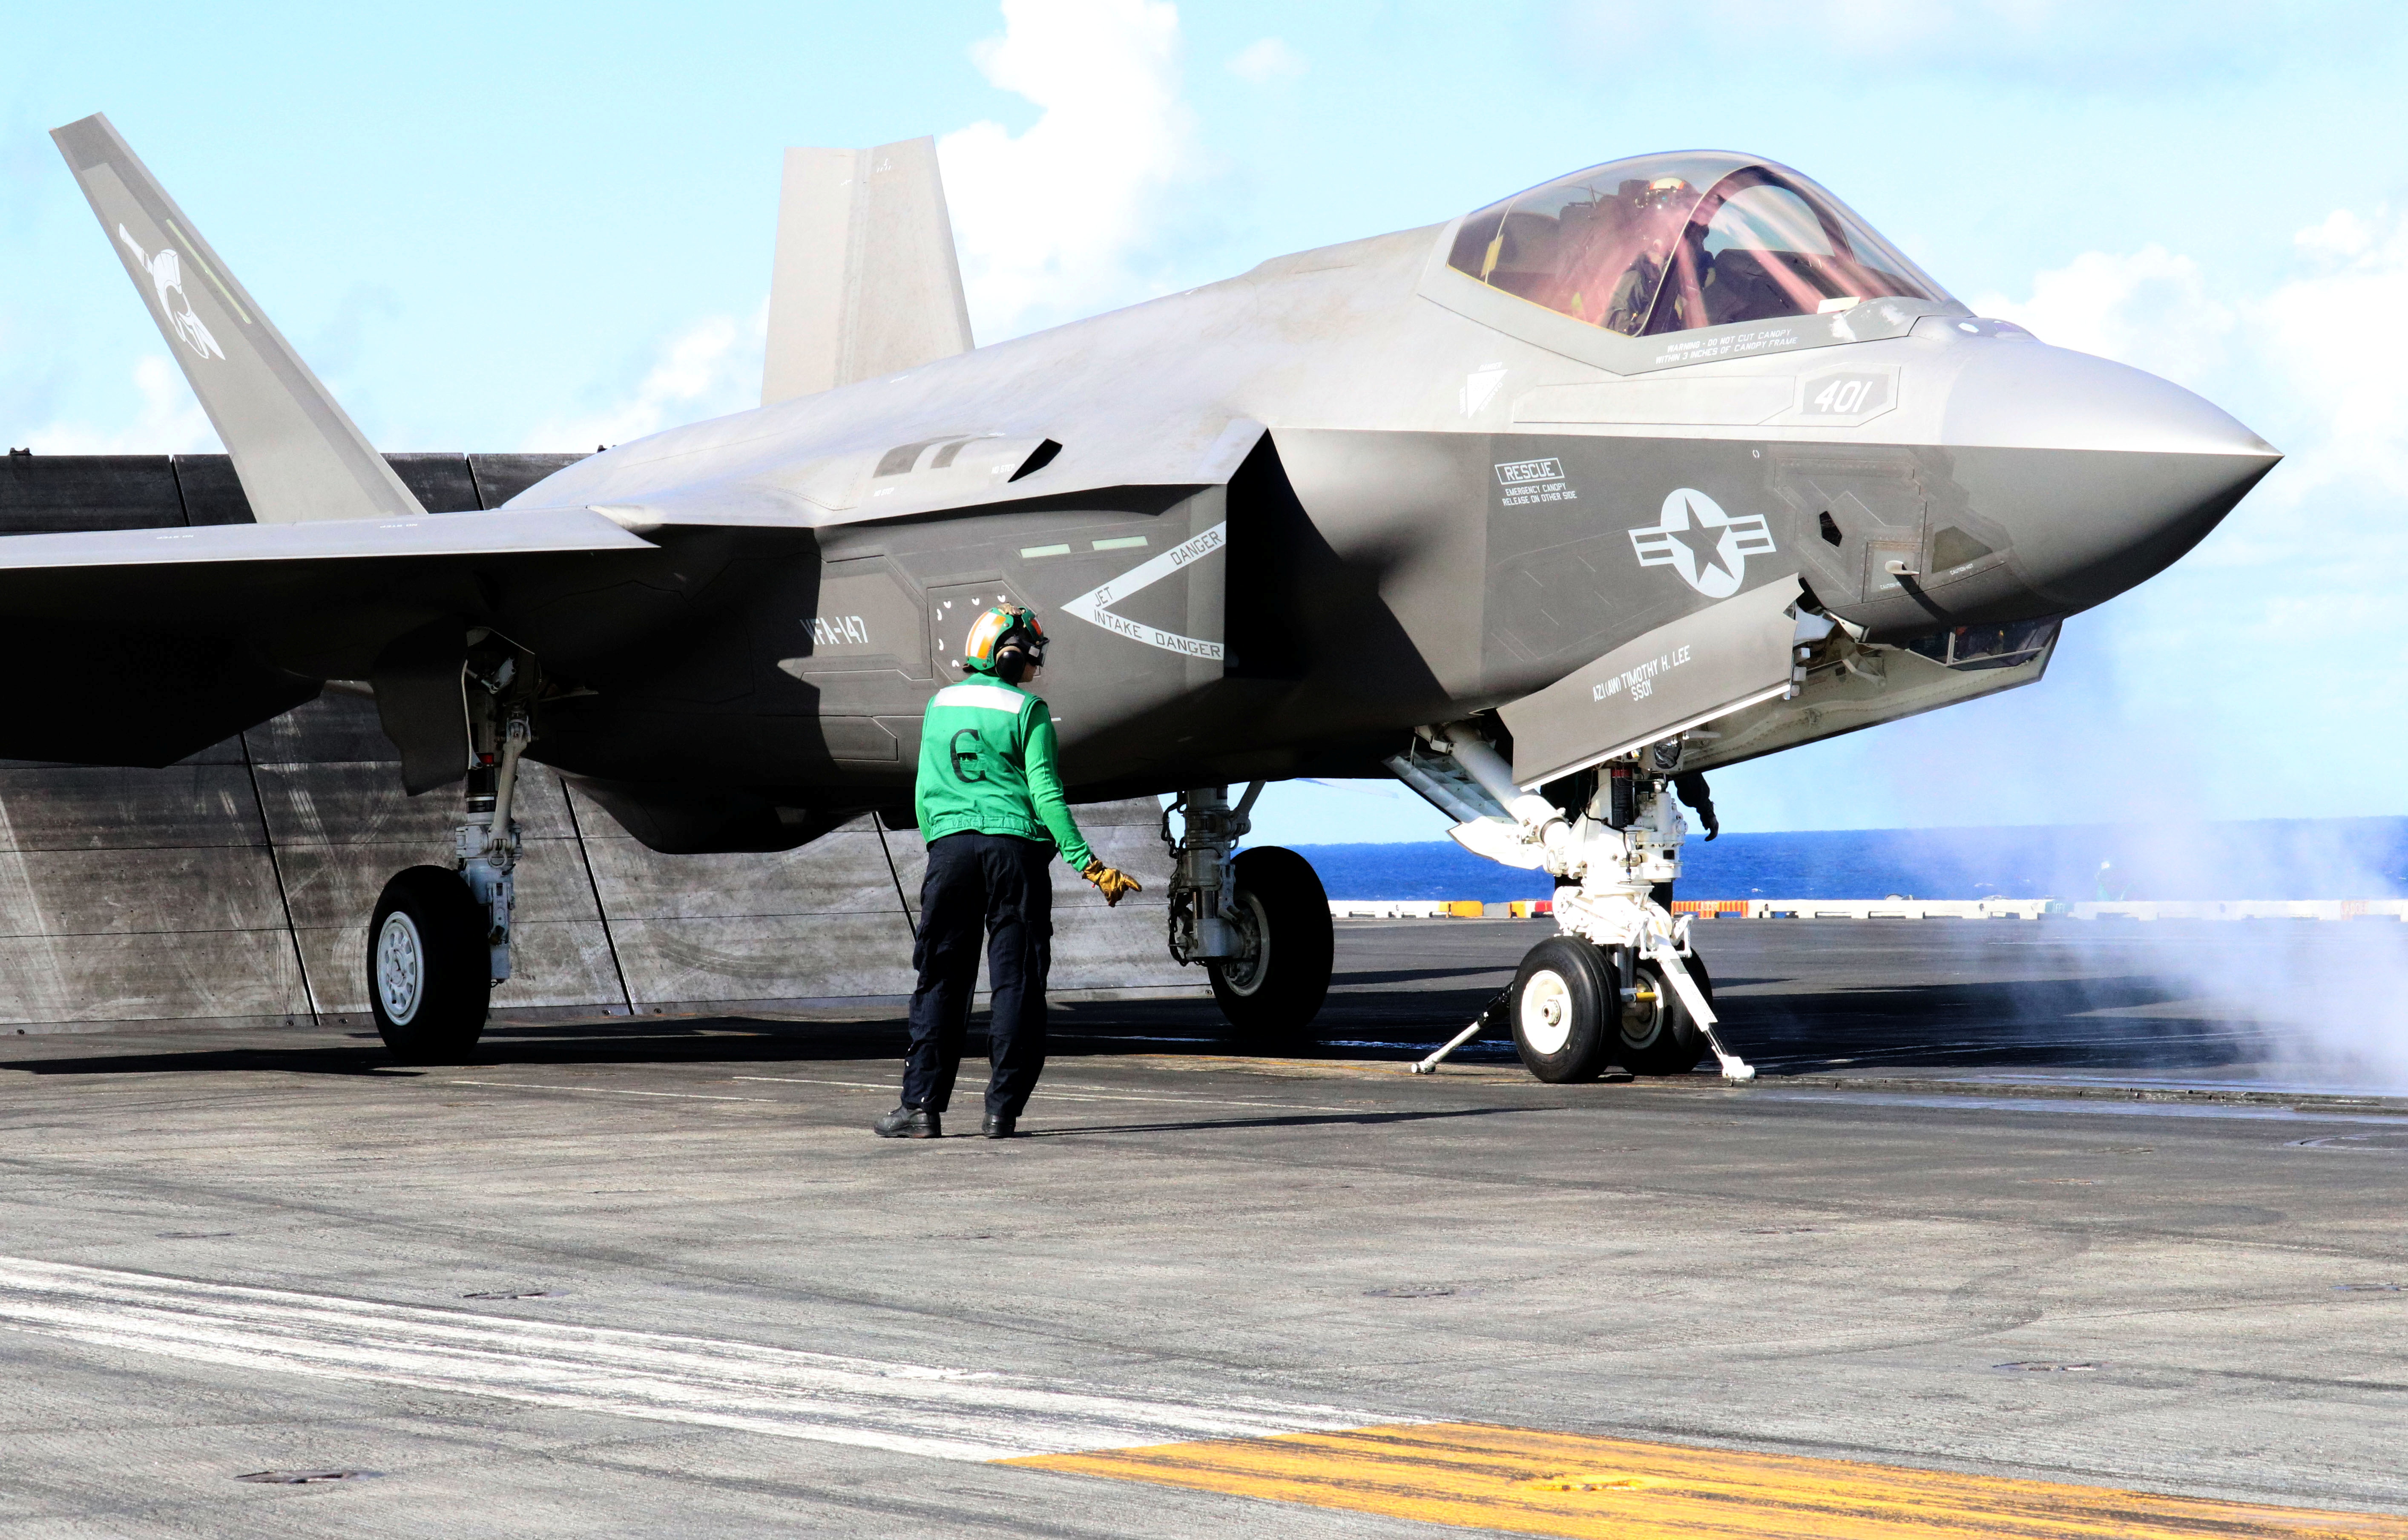 F-35C prepares to catapult from the deck of the USS Carl Vinson in the Western Pacific, south of Japan, November 30, 2021. REUTERS/Tim Kelly